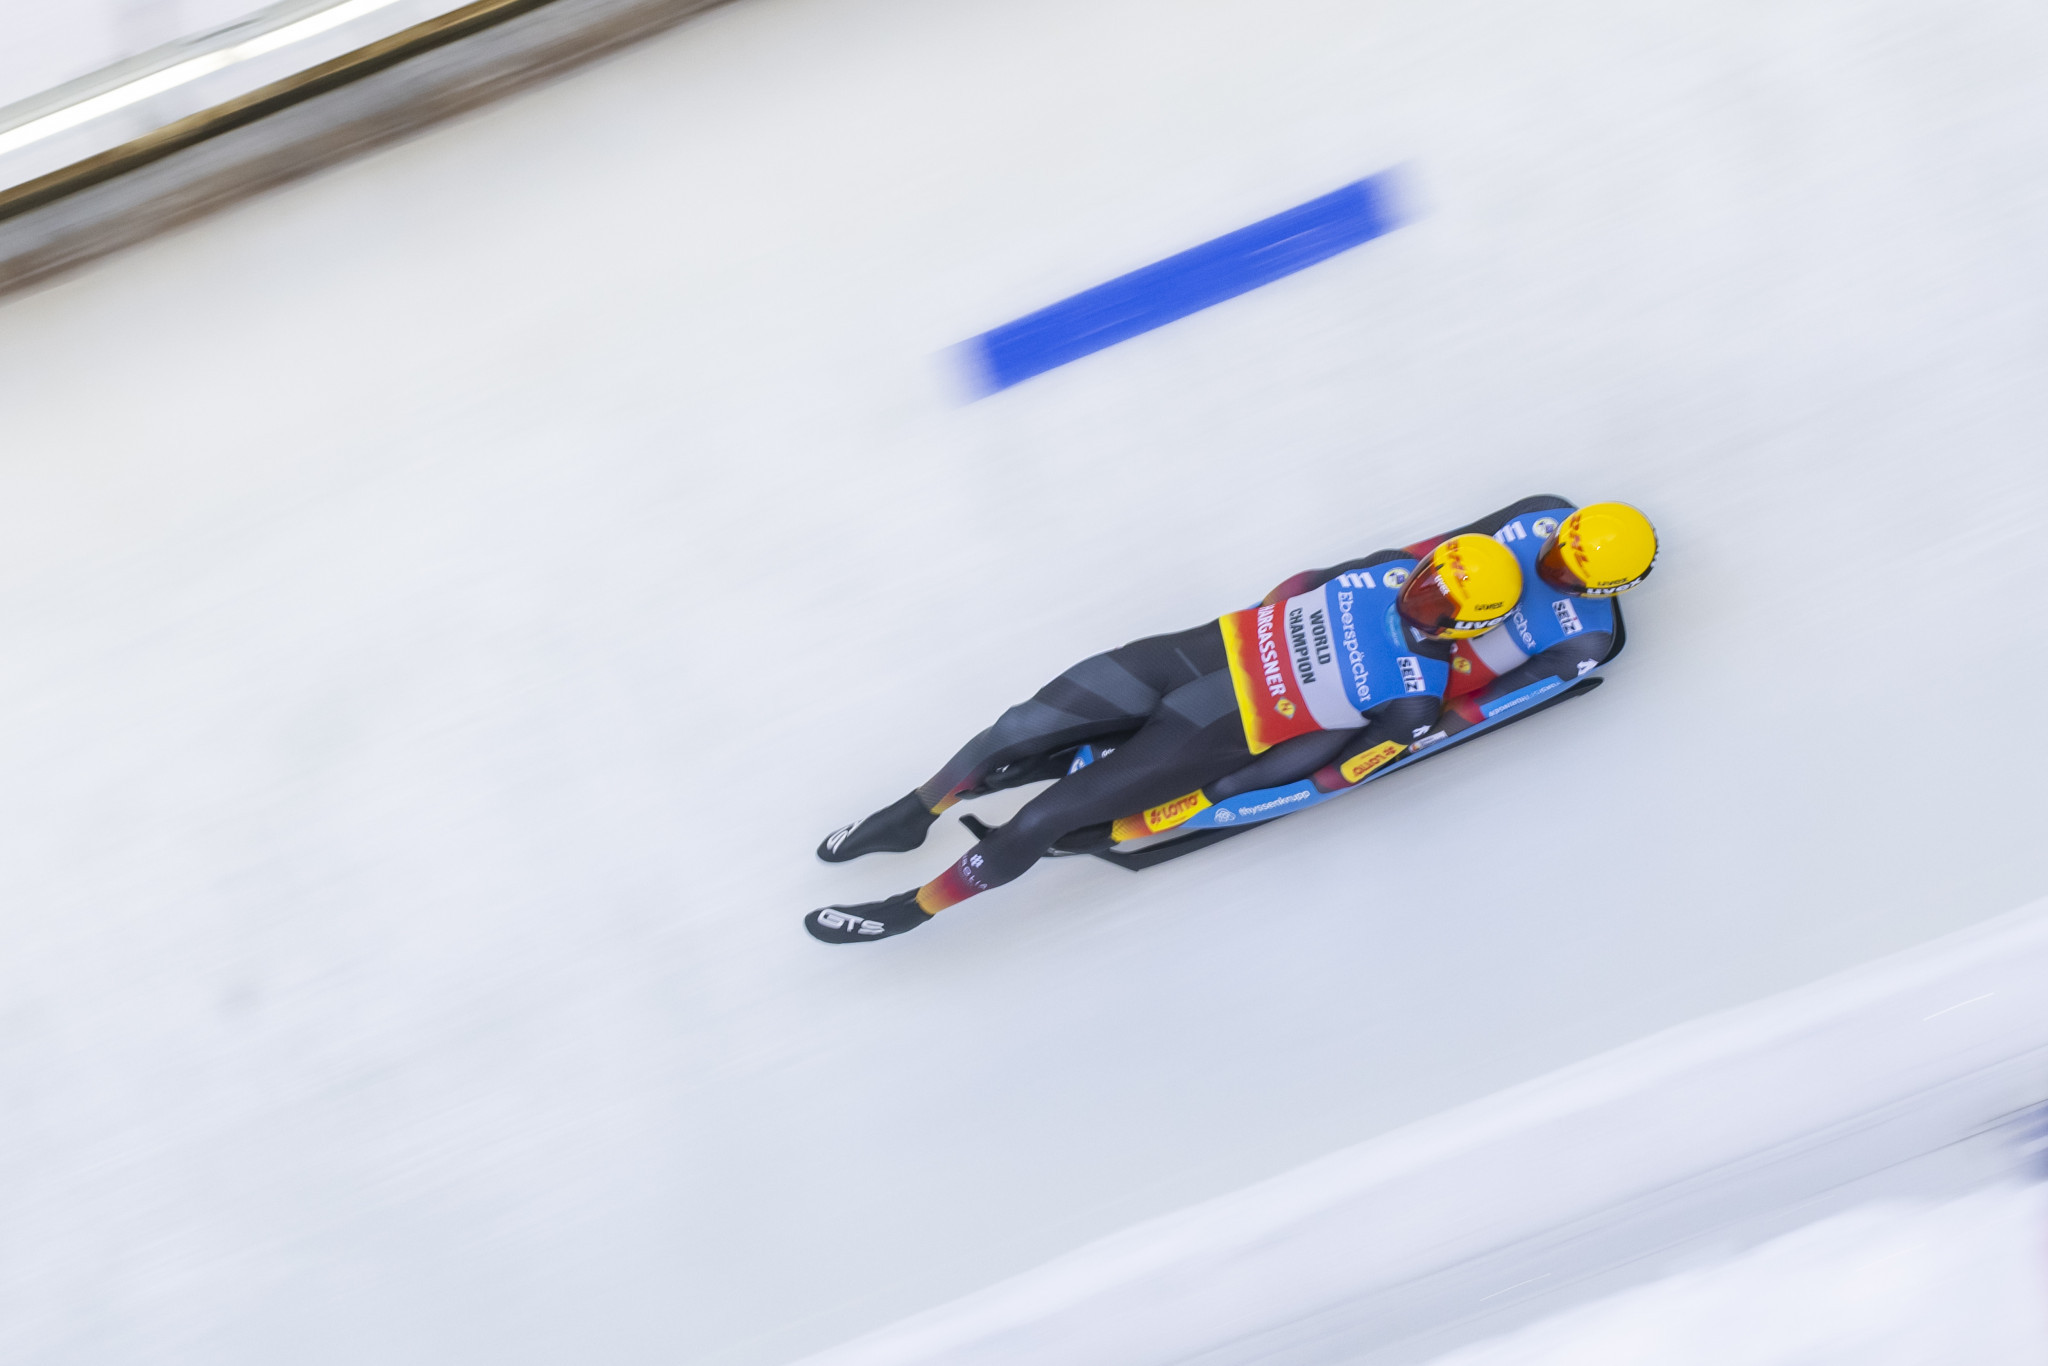 Eggert and Benecken clinch Luge World Cup doubles title with victory in St Moritz